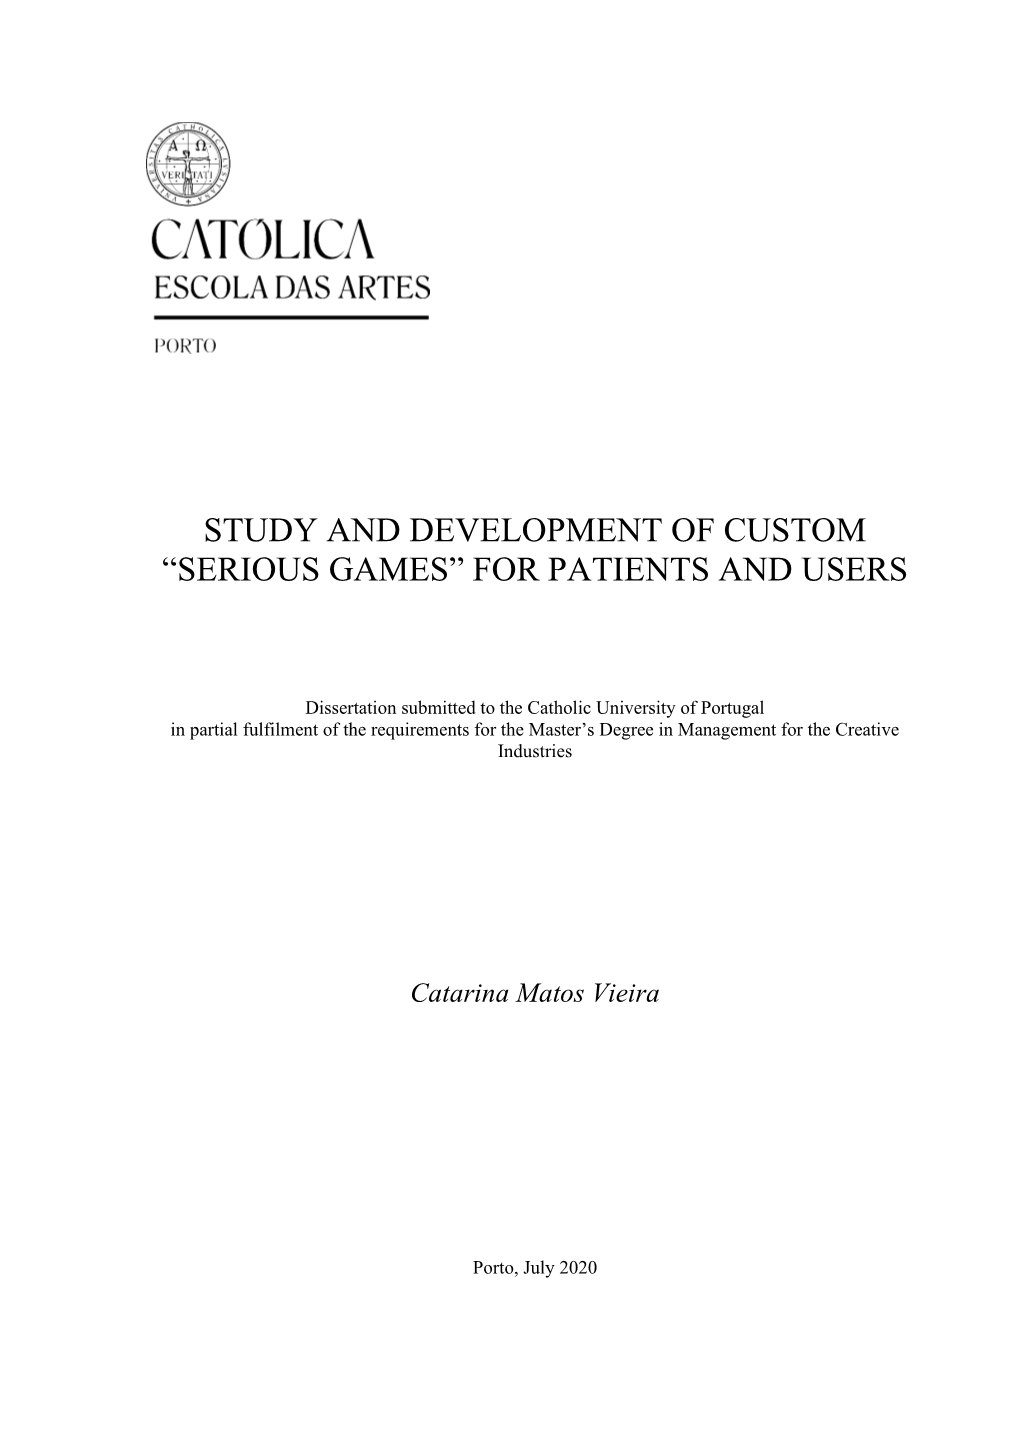 Study and Development of Custom “Serious Games” for Patients and Users